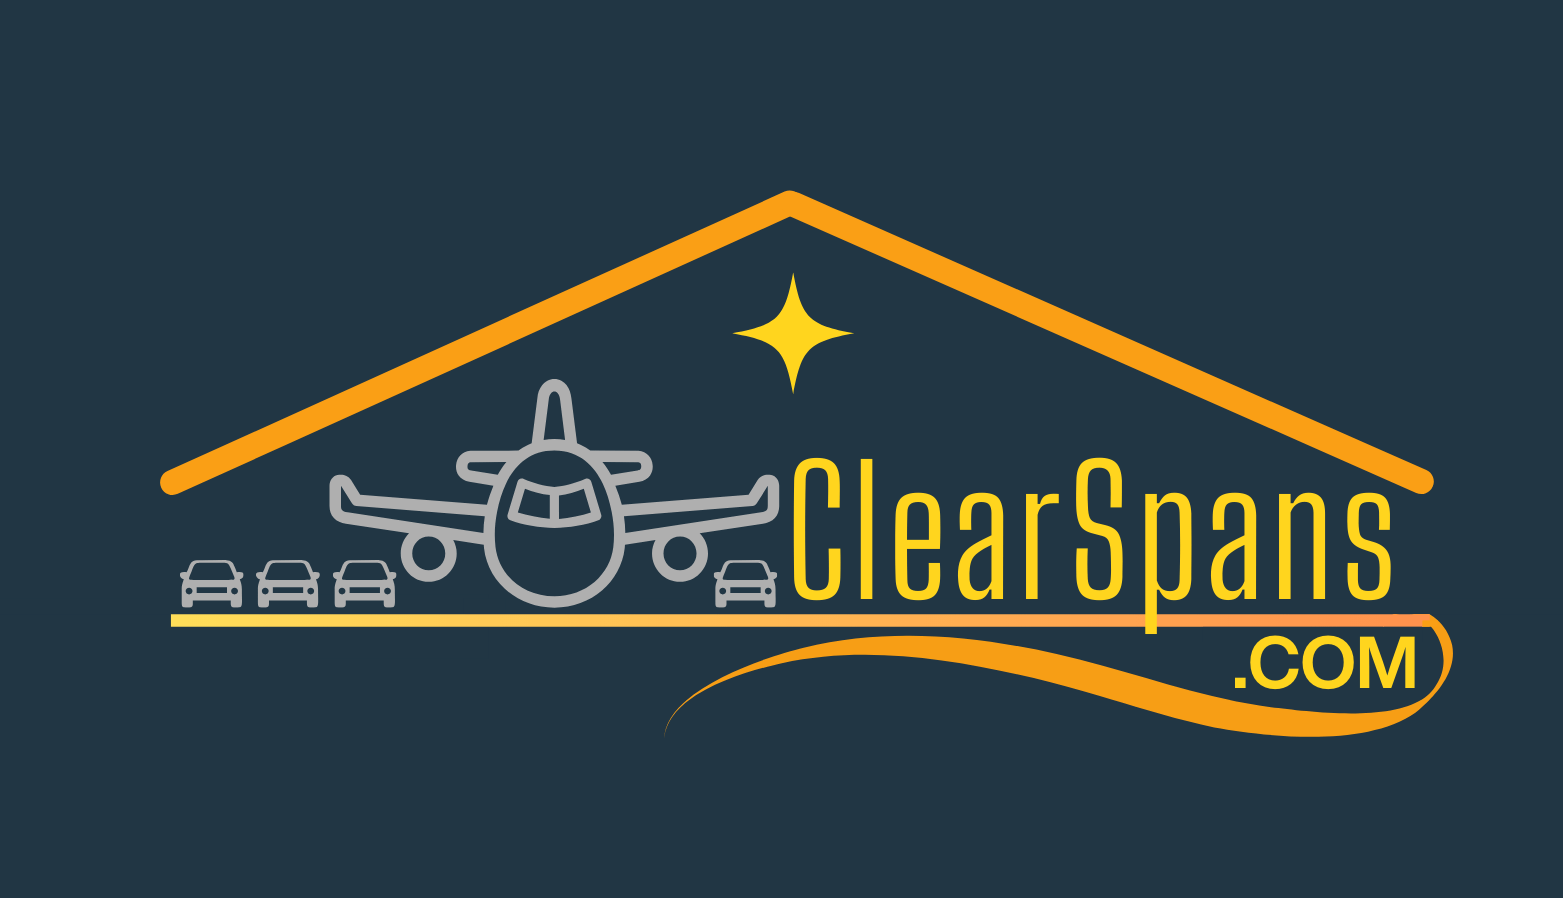 ClearSpans.com